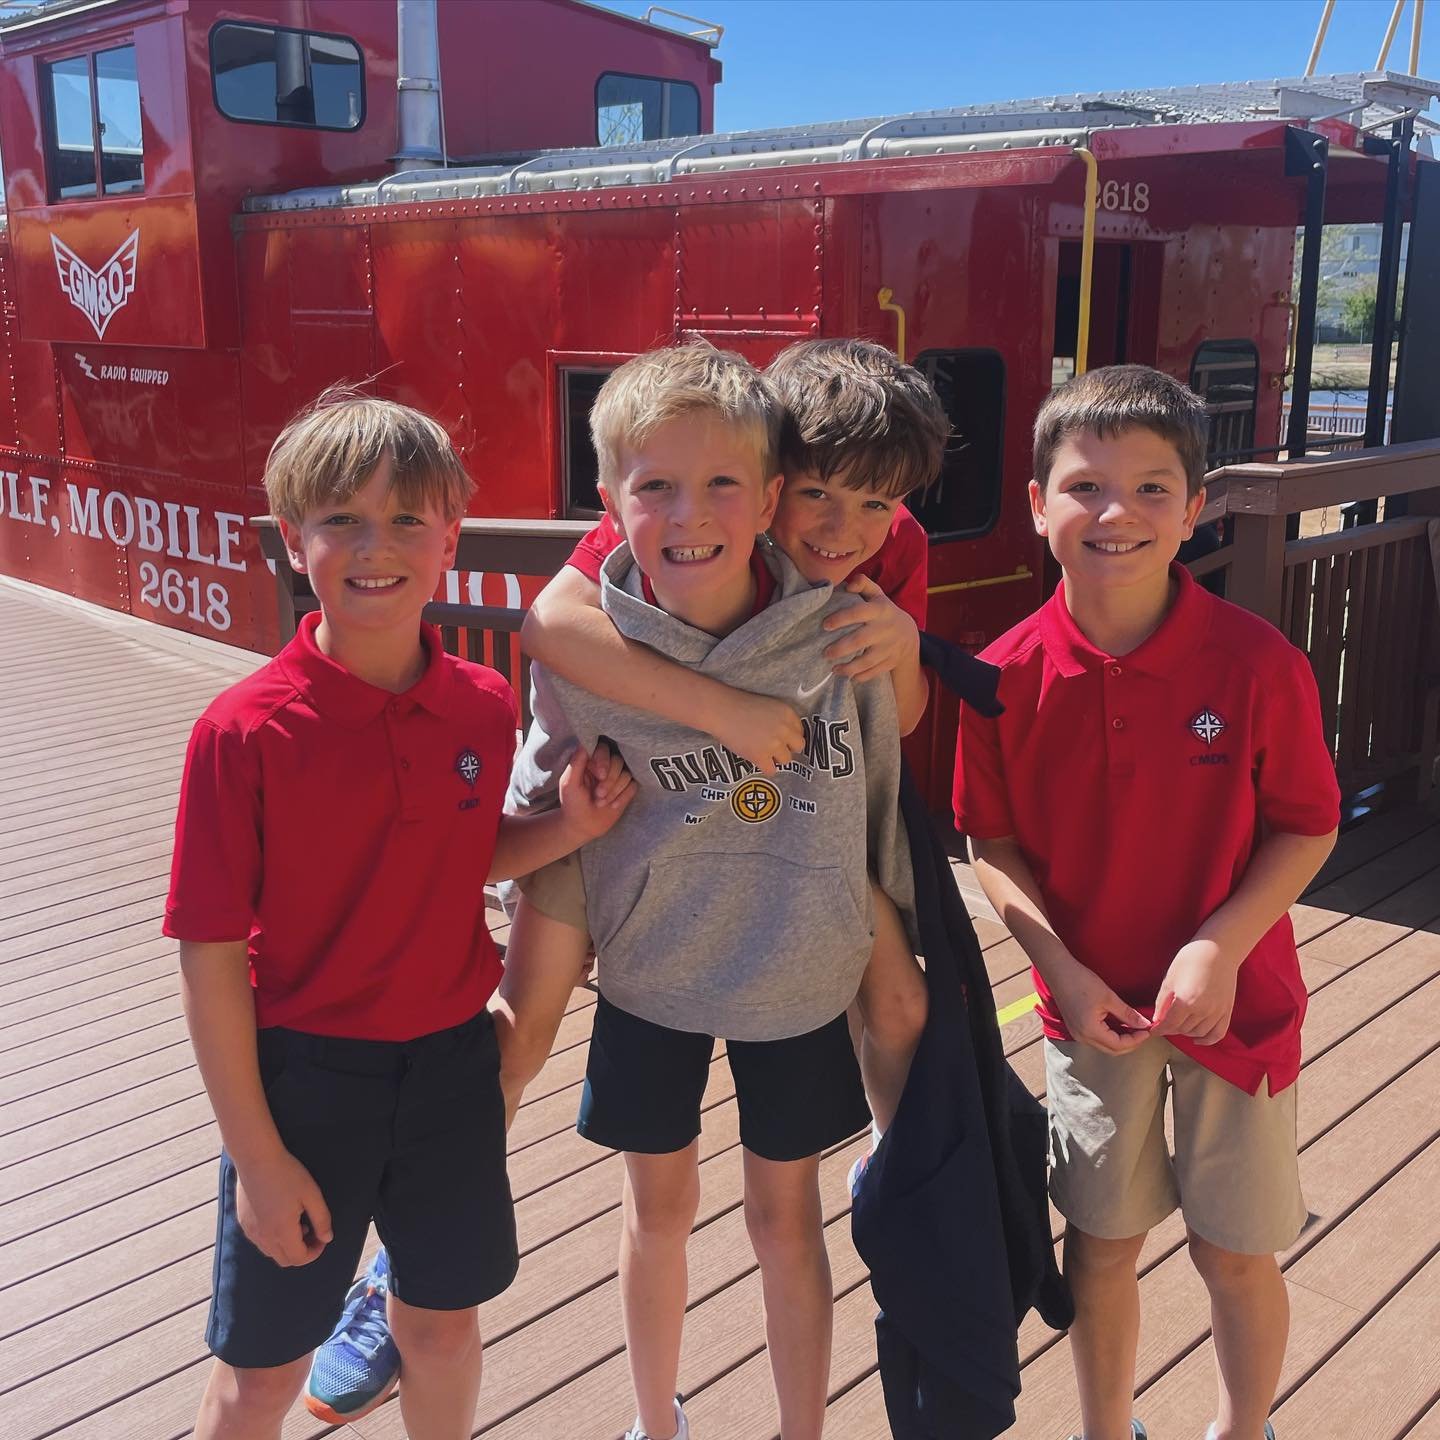 Our 3rd graders had the best time on their field trip to Discovery Park of America! They visited the museum exhibits focused on topics like science, space, technology, the military, natural history, regional history, art, transportation and more! It 